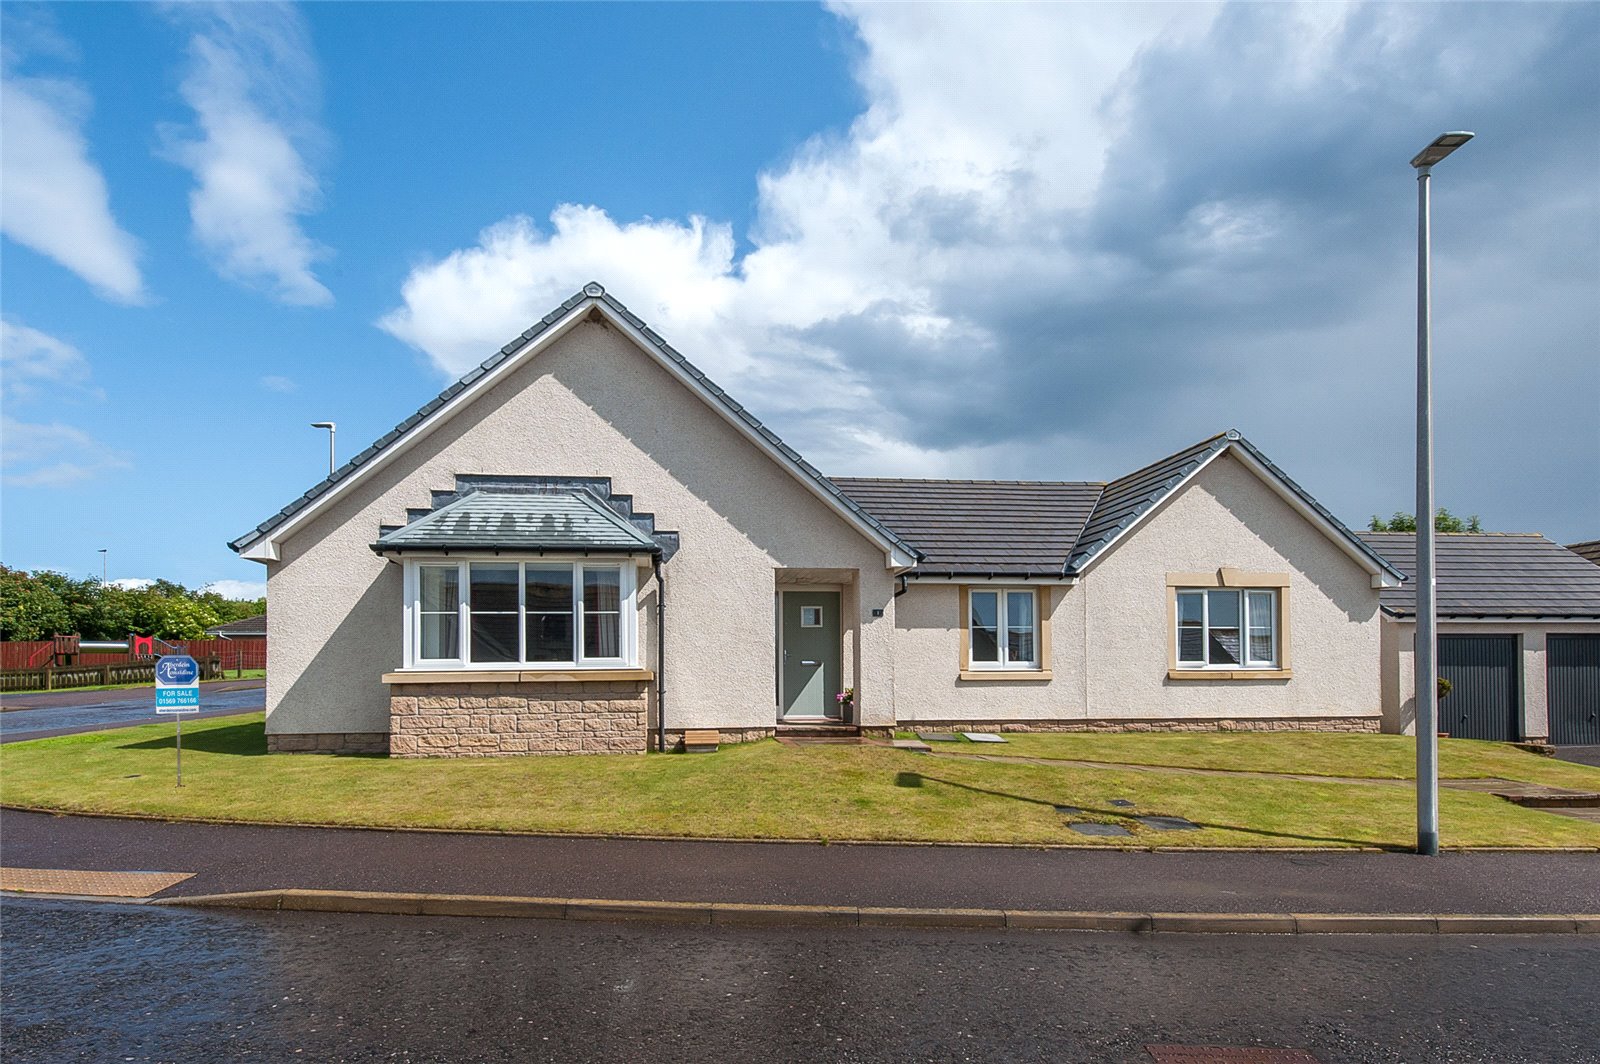 Our latest properties for sale and to let (9th August 2019)